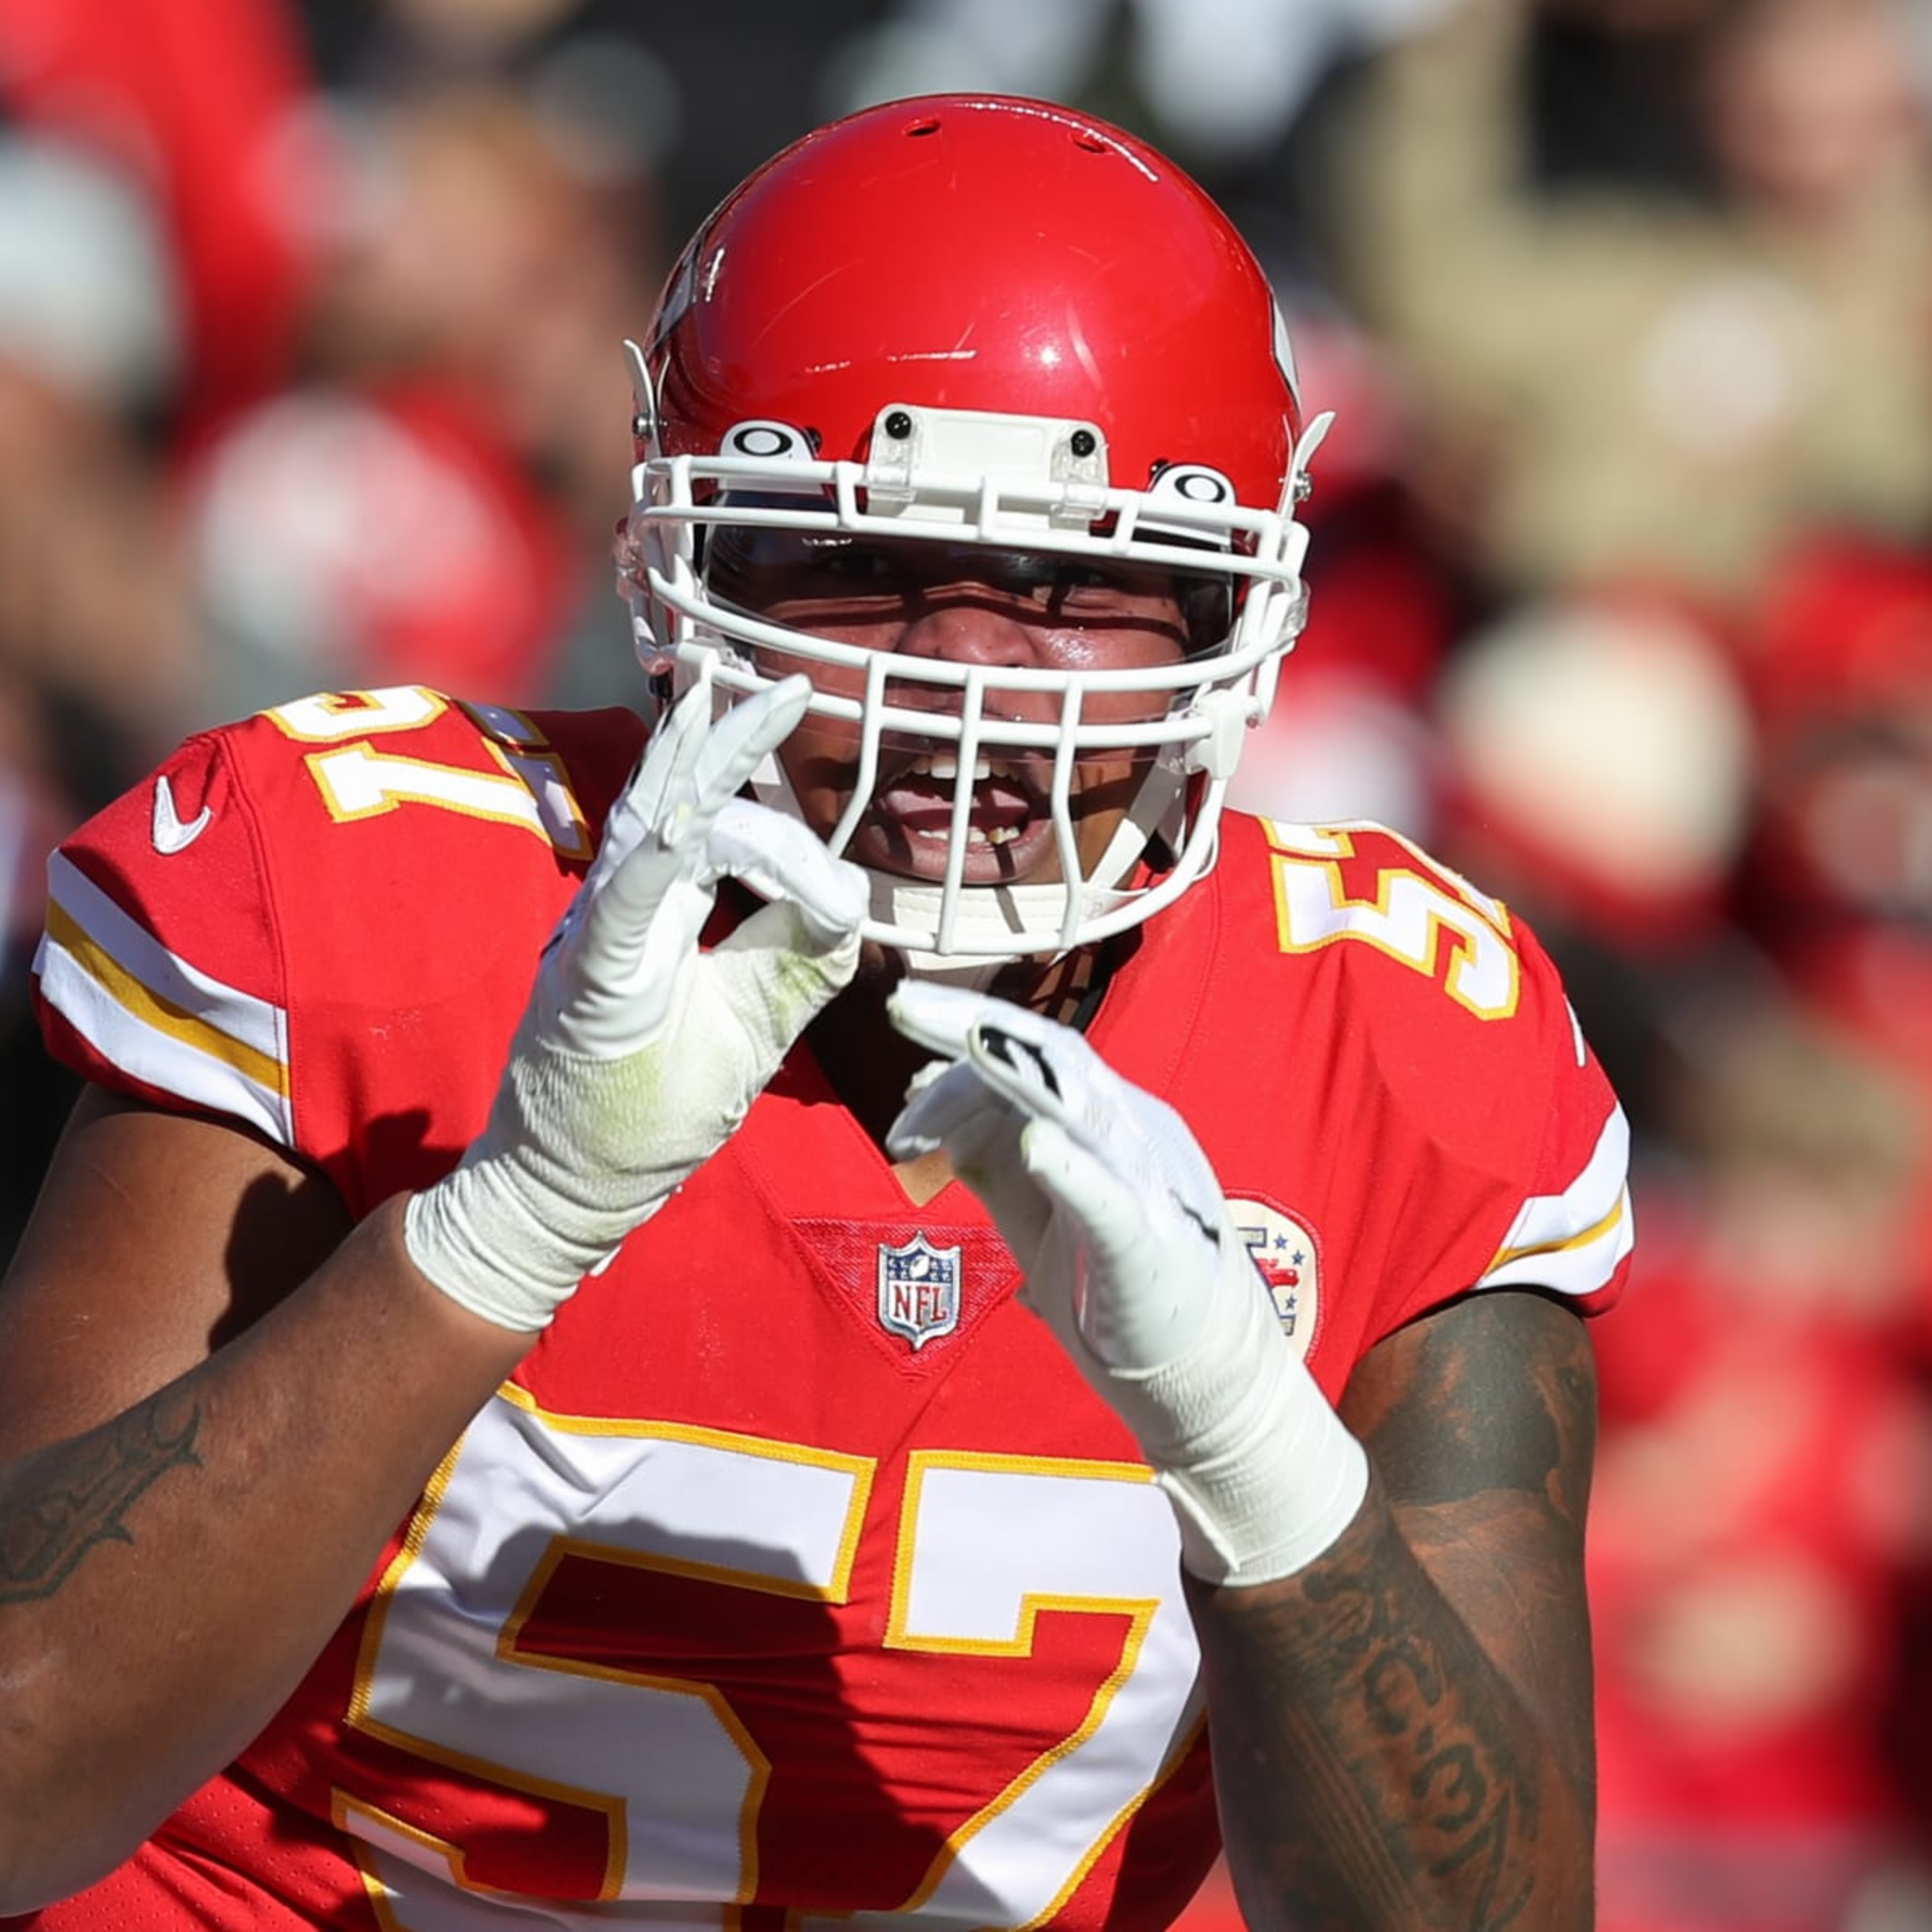 Andy Reid Unsure If Orlando Brown Jr. Will Be at Chiefs Camp: ‘If Not, We Move on’